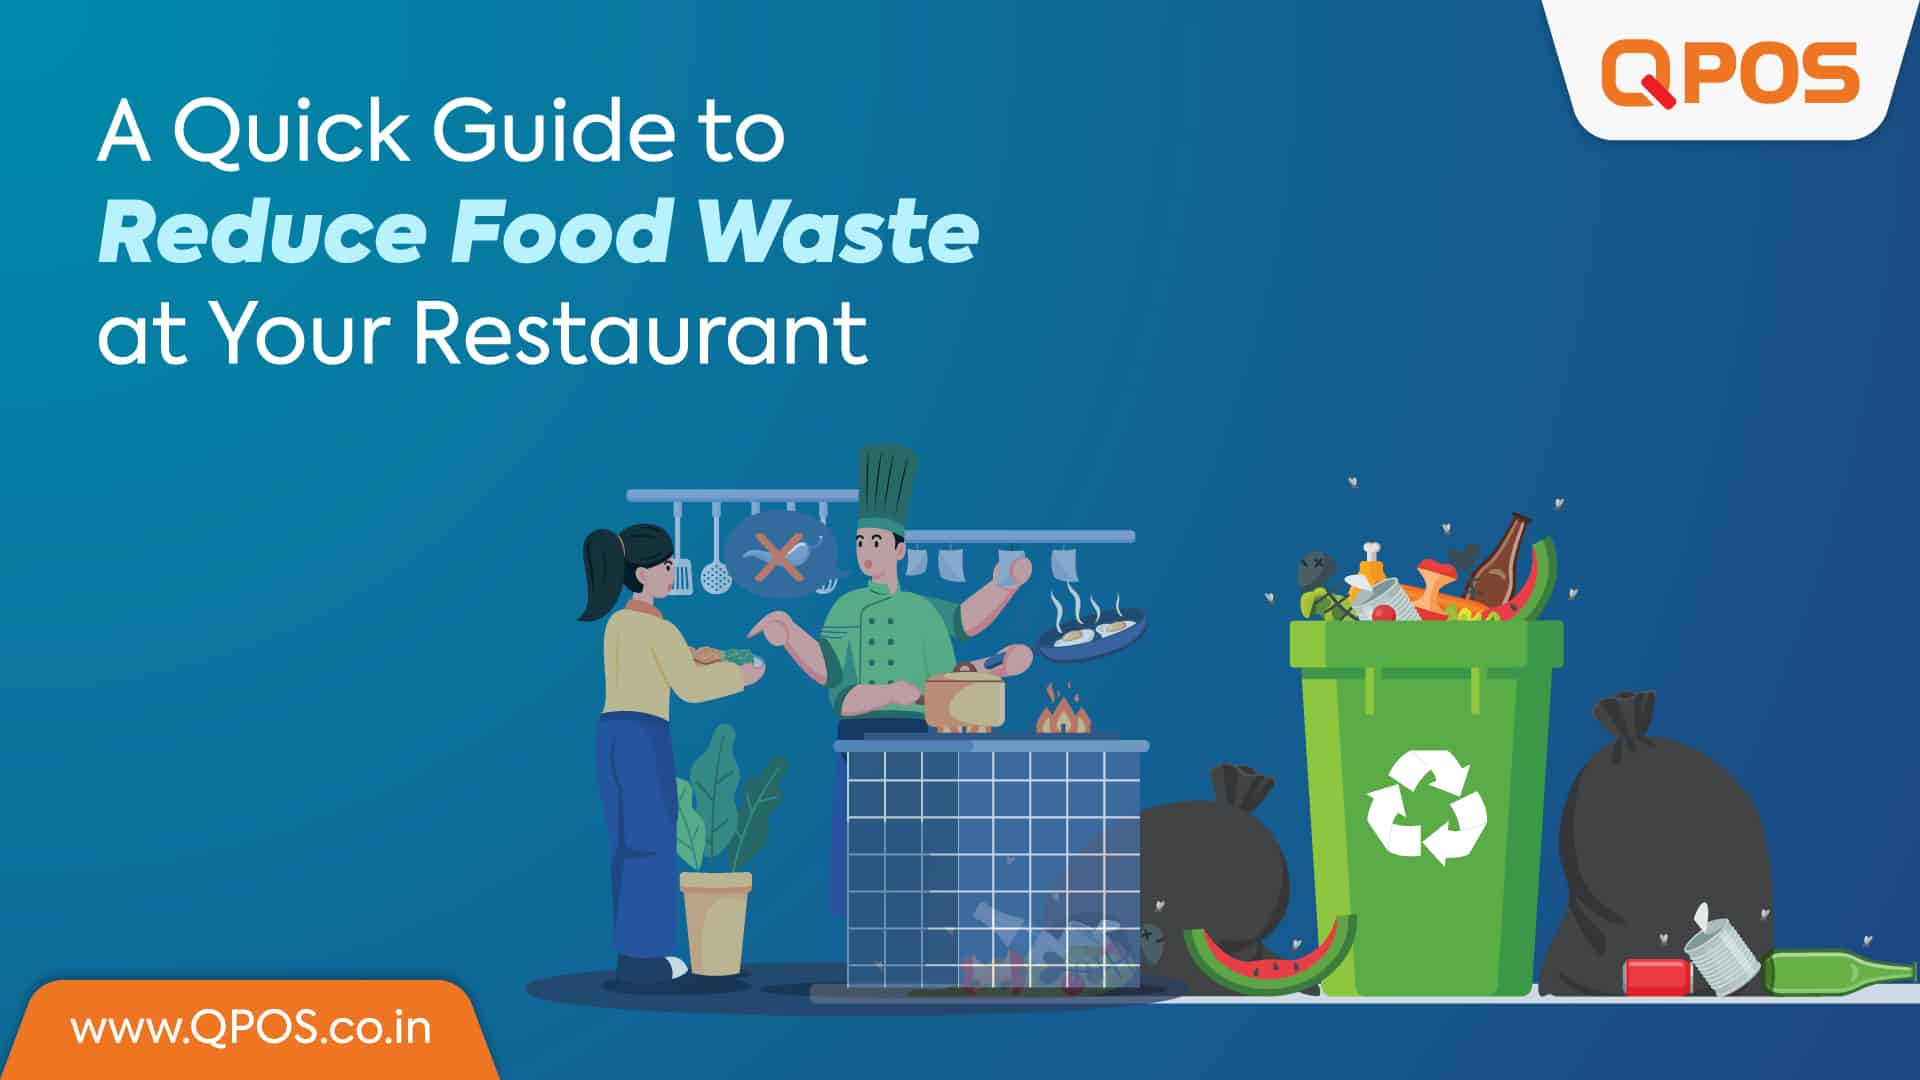 A Quick Guide to Reduce Food Waste at Your Restaurant